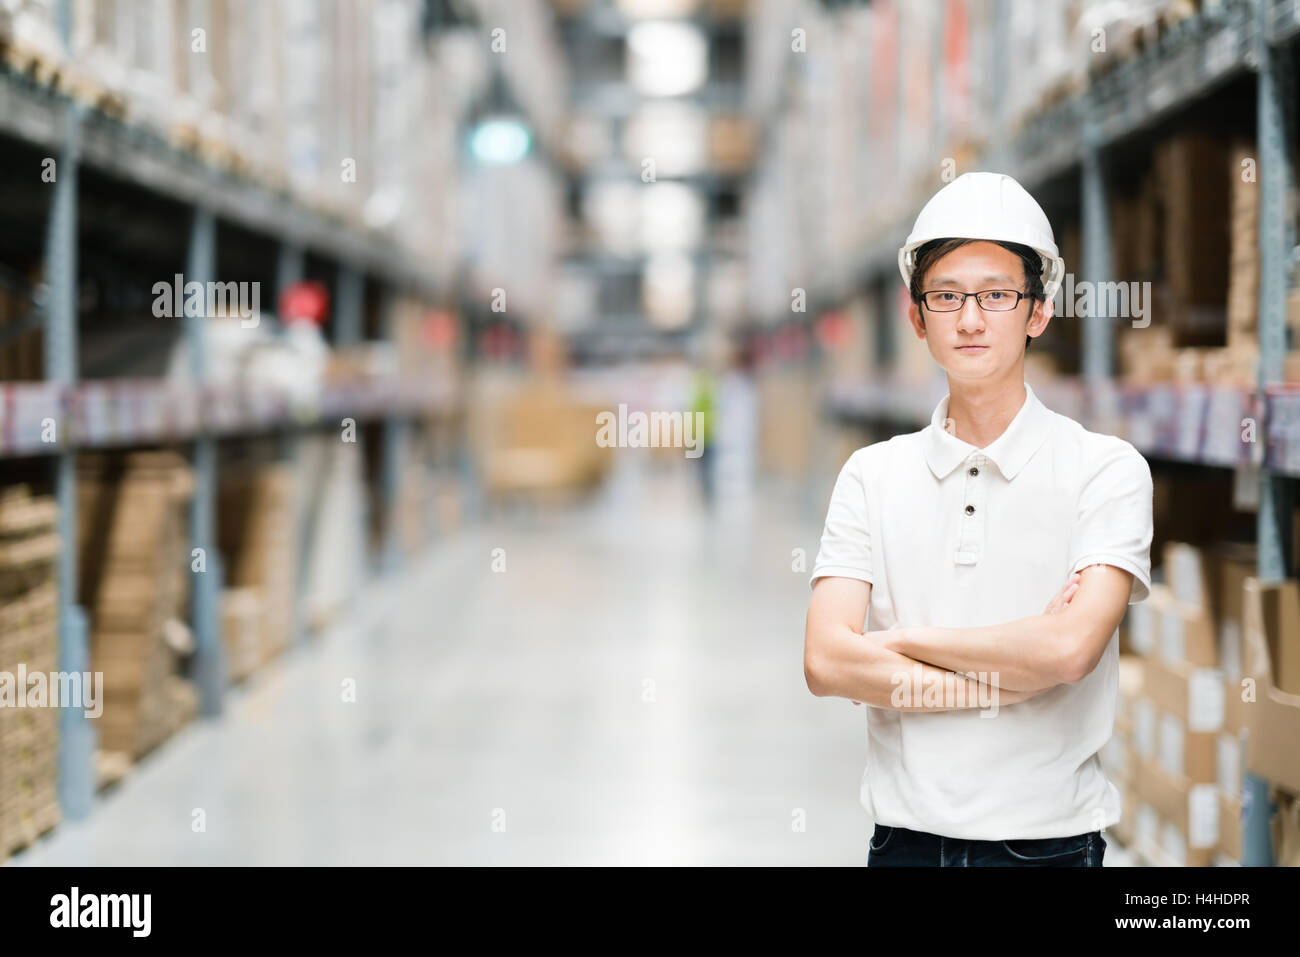 Handsome young Asian engineer or technician or worker, warehouse or factory blur background, industry or logistic concept, with Stock Photo